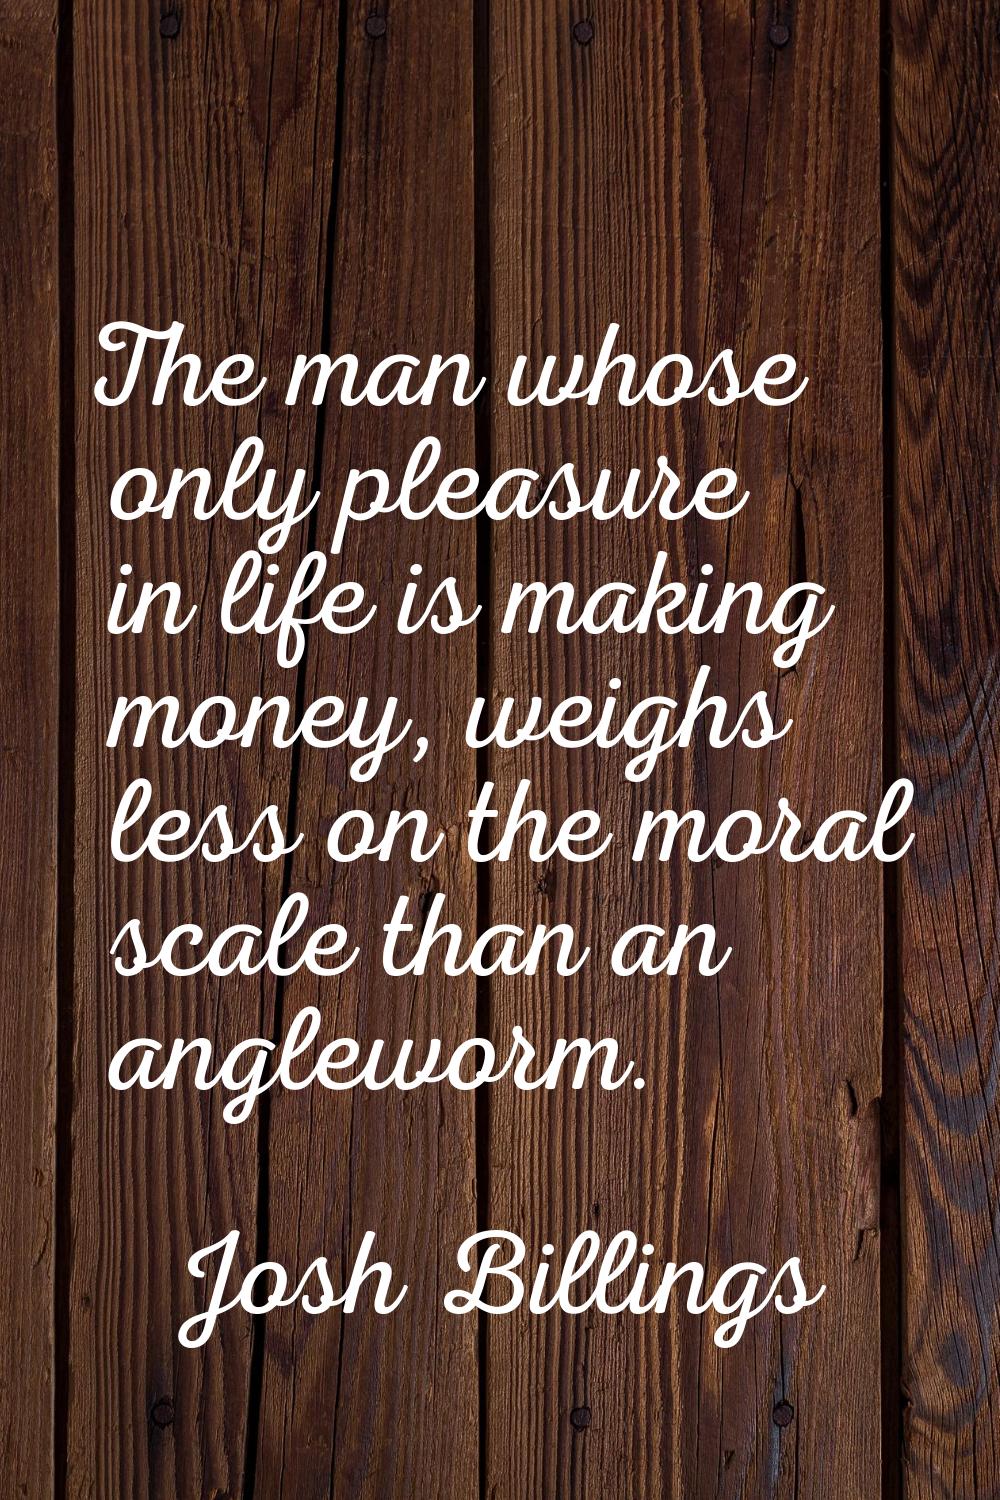 The man whose only pleasure in life is making money, weighs less on the moral scale than an anglewo